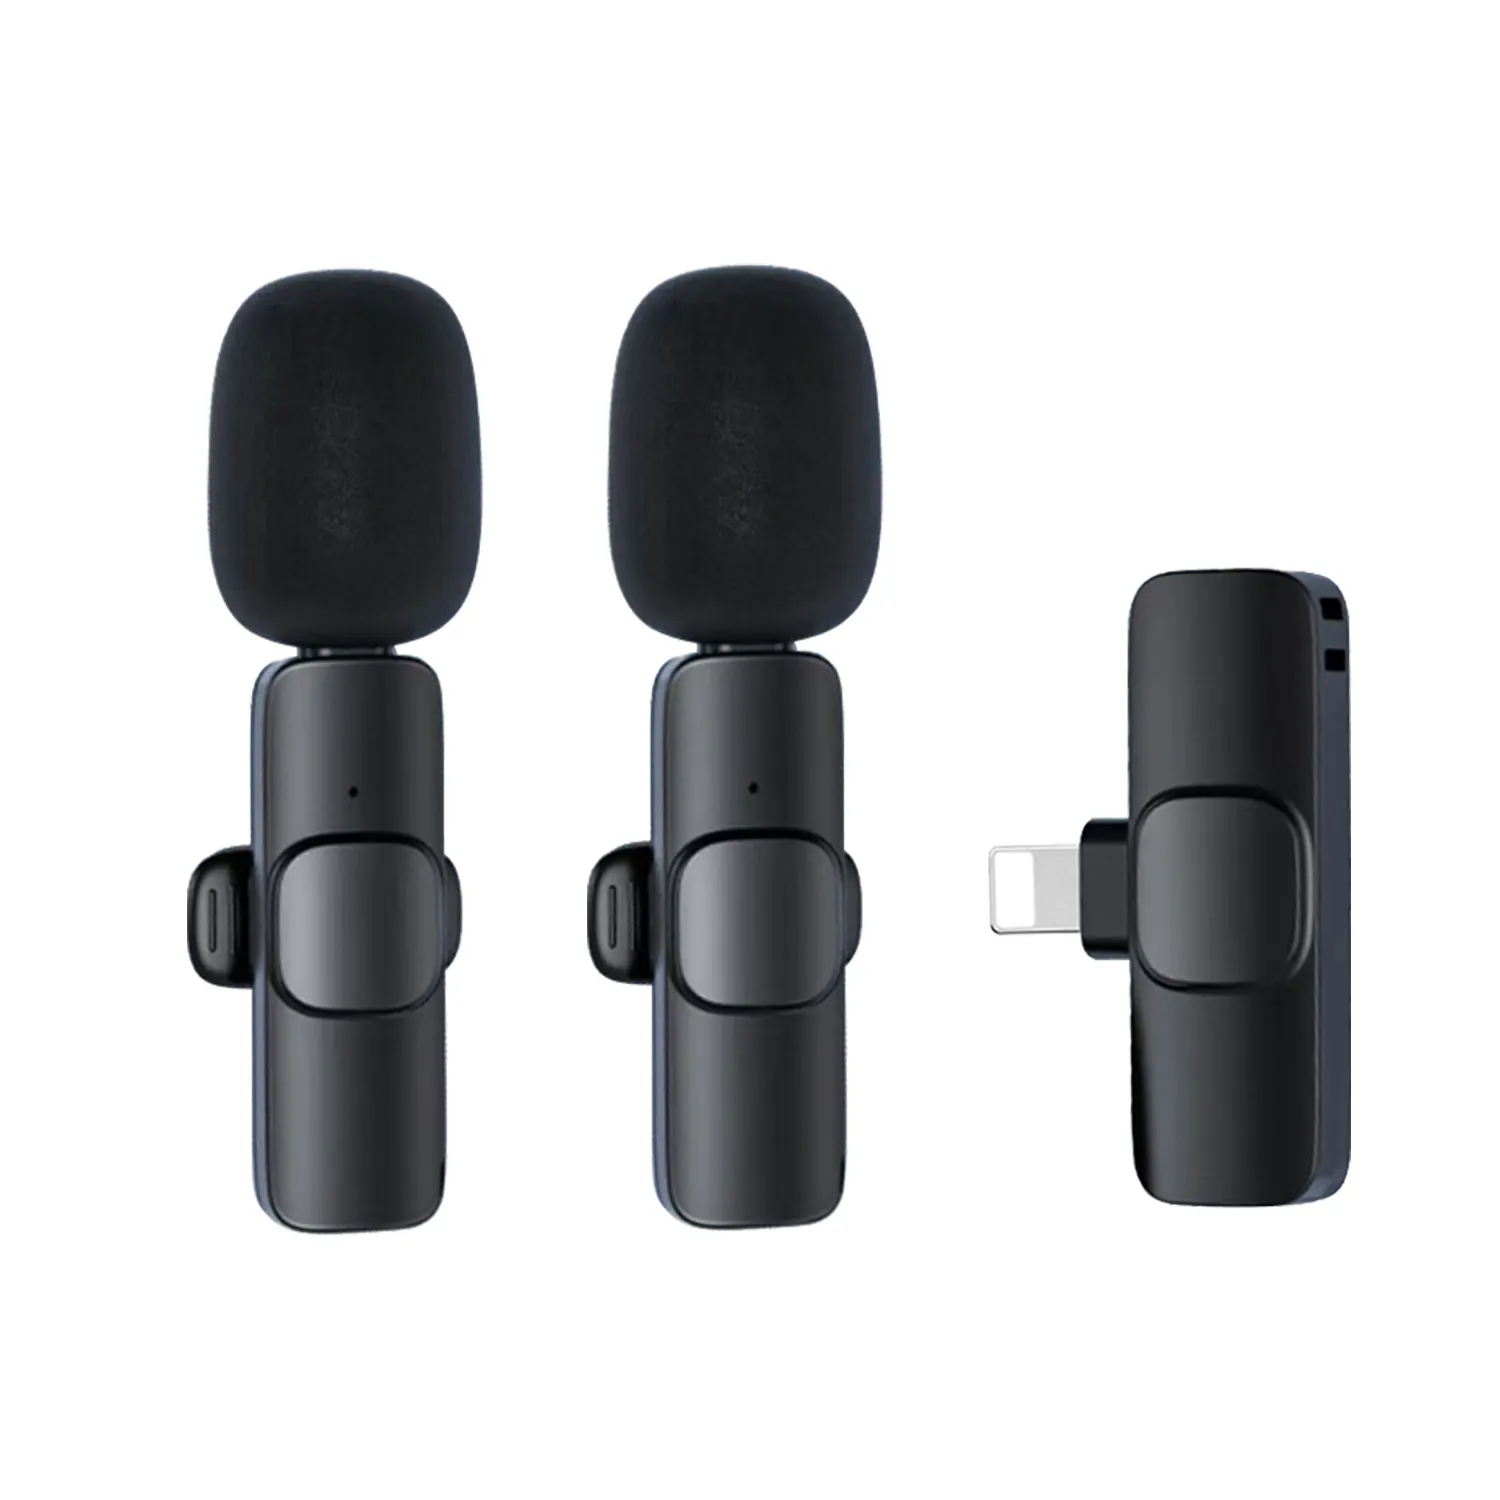 2 Mic Lavalier Mic Wireless clip Microphone Noise Reduction Outdoor Live Android IOS Lavalier Microphone